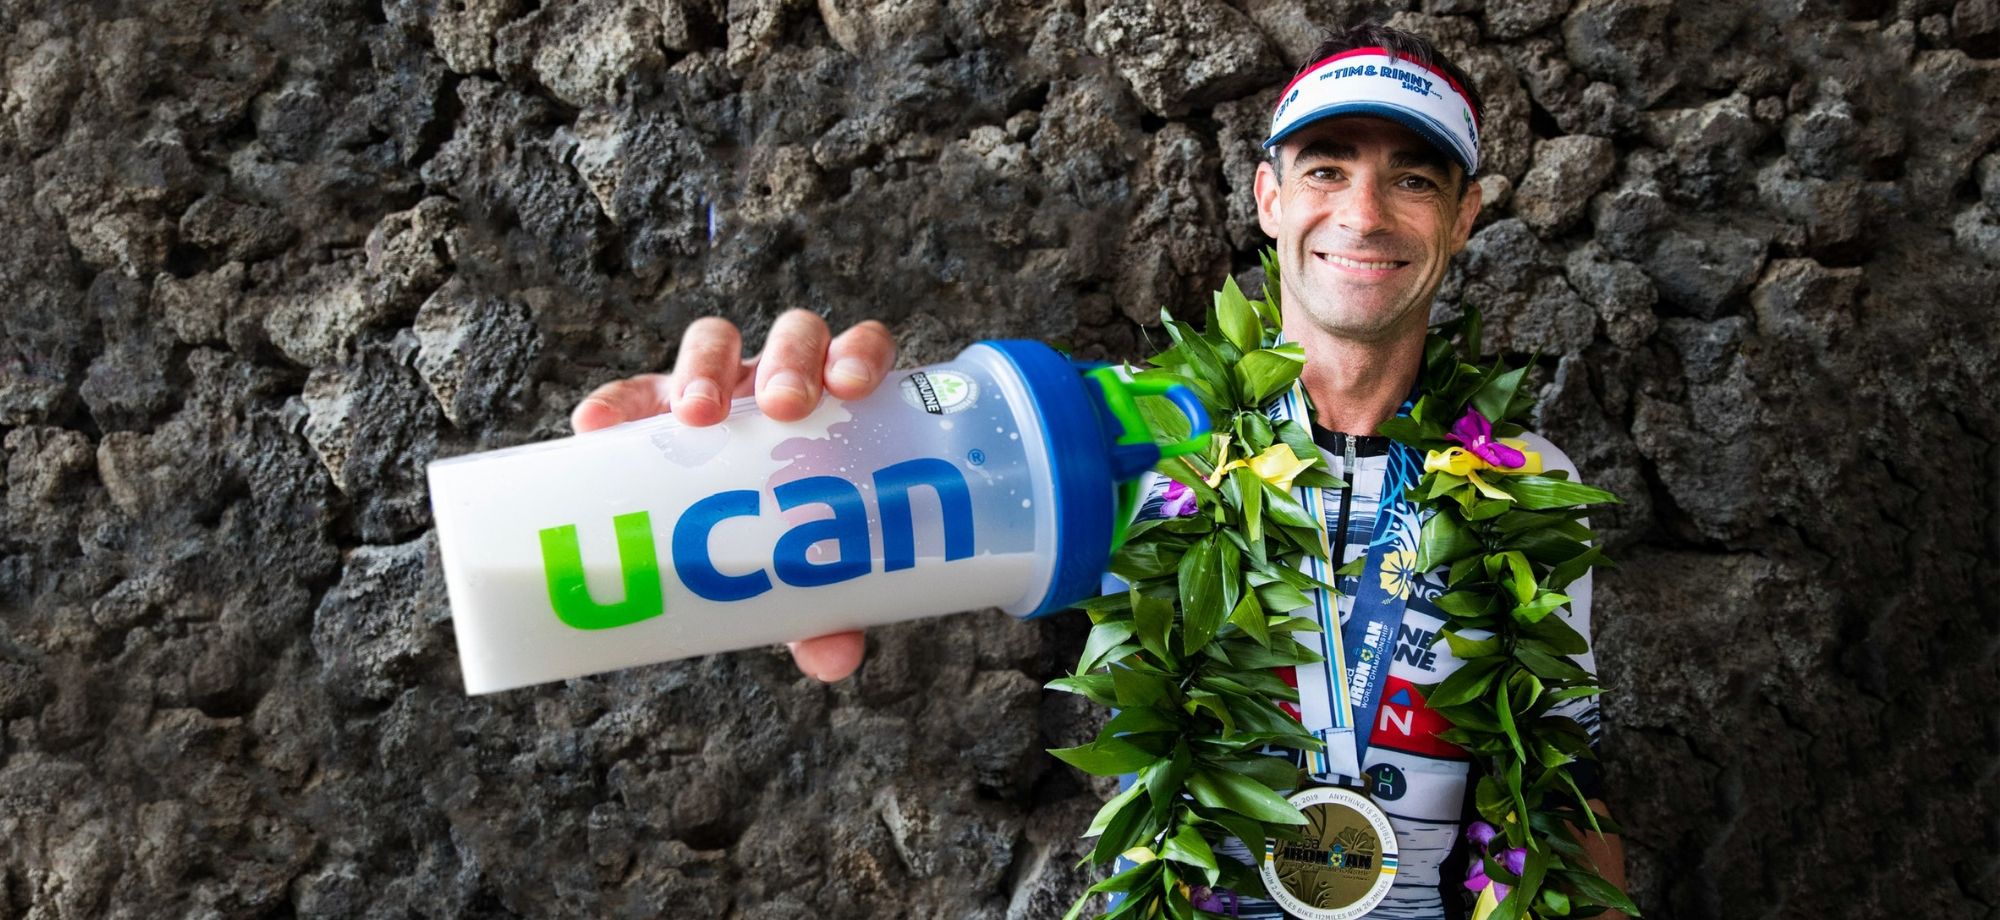 The UCAN Podcast - How Pro Triathlete Tim O'Donnell Trained and Fueled His 2nd Place Finish in Kona